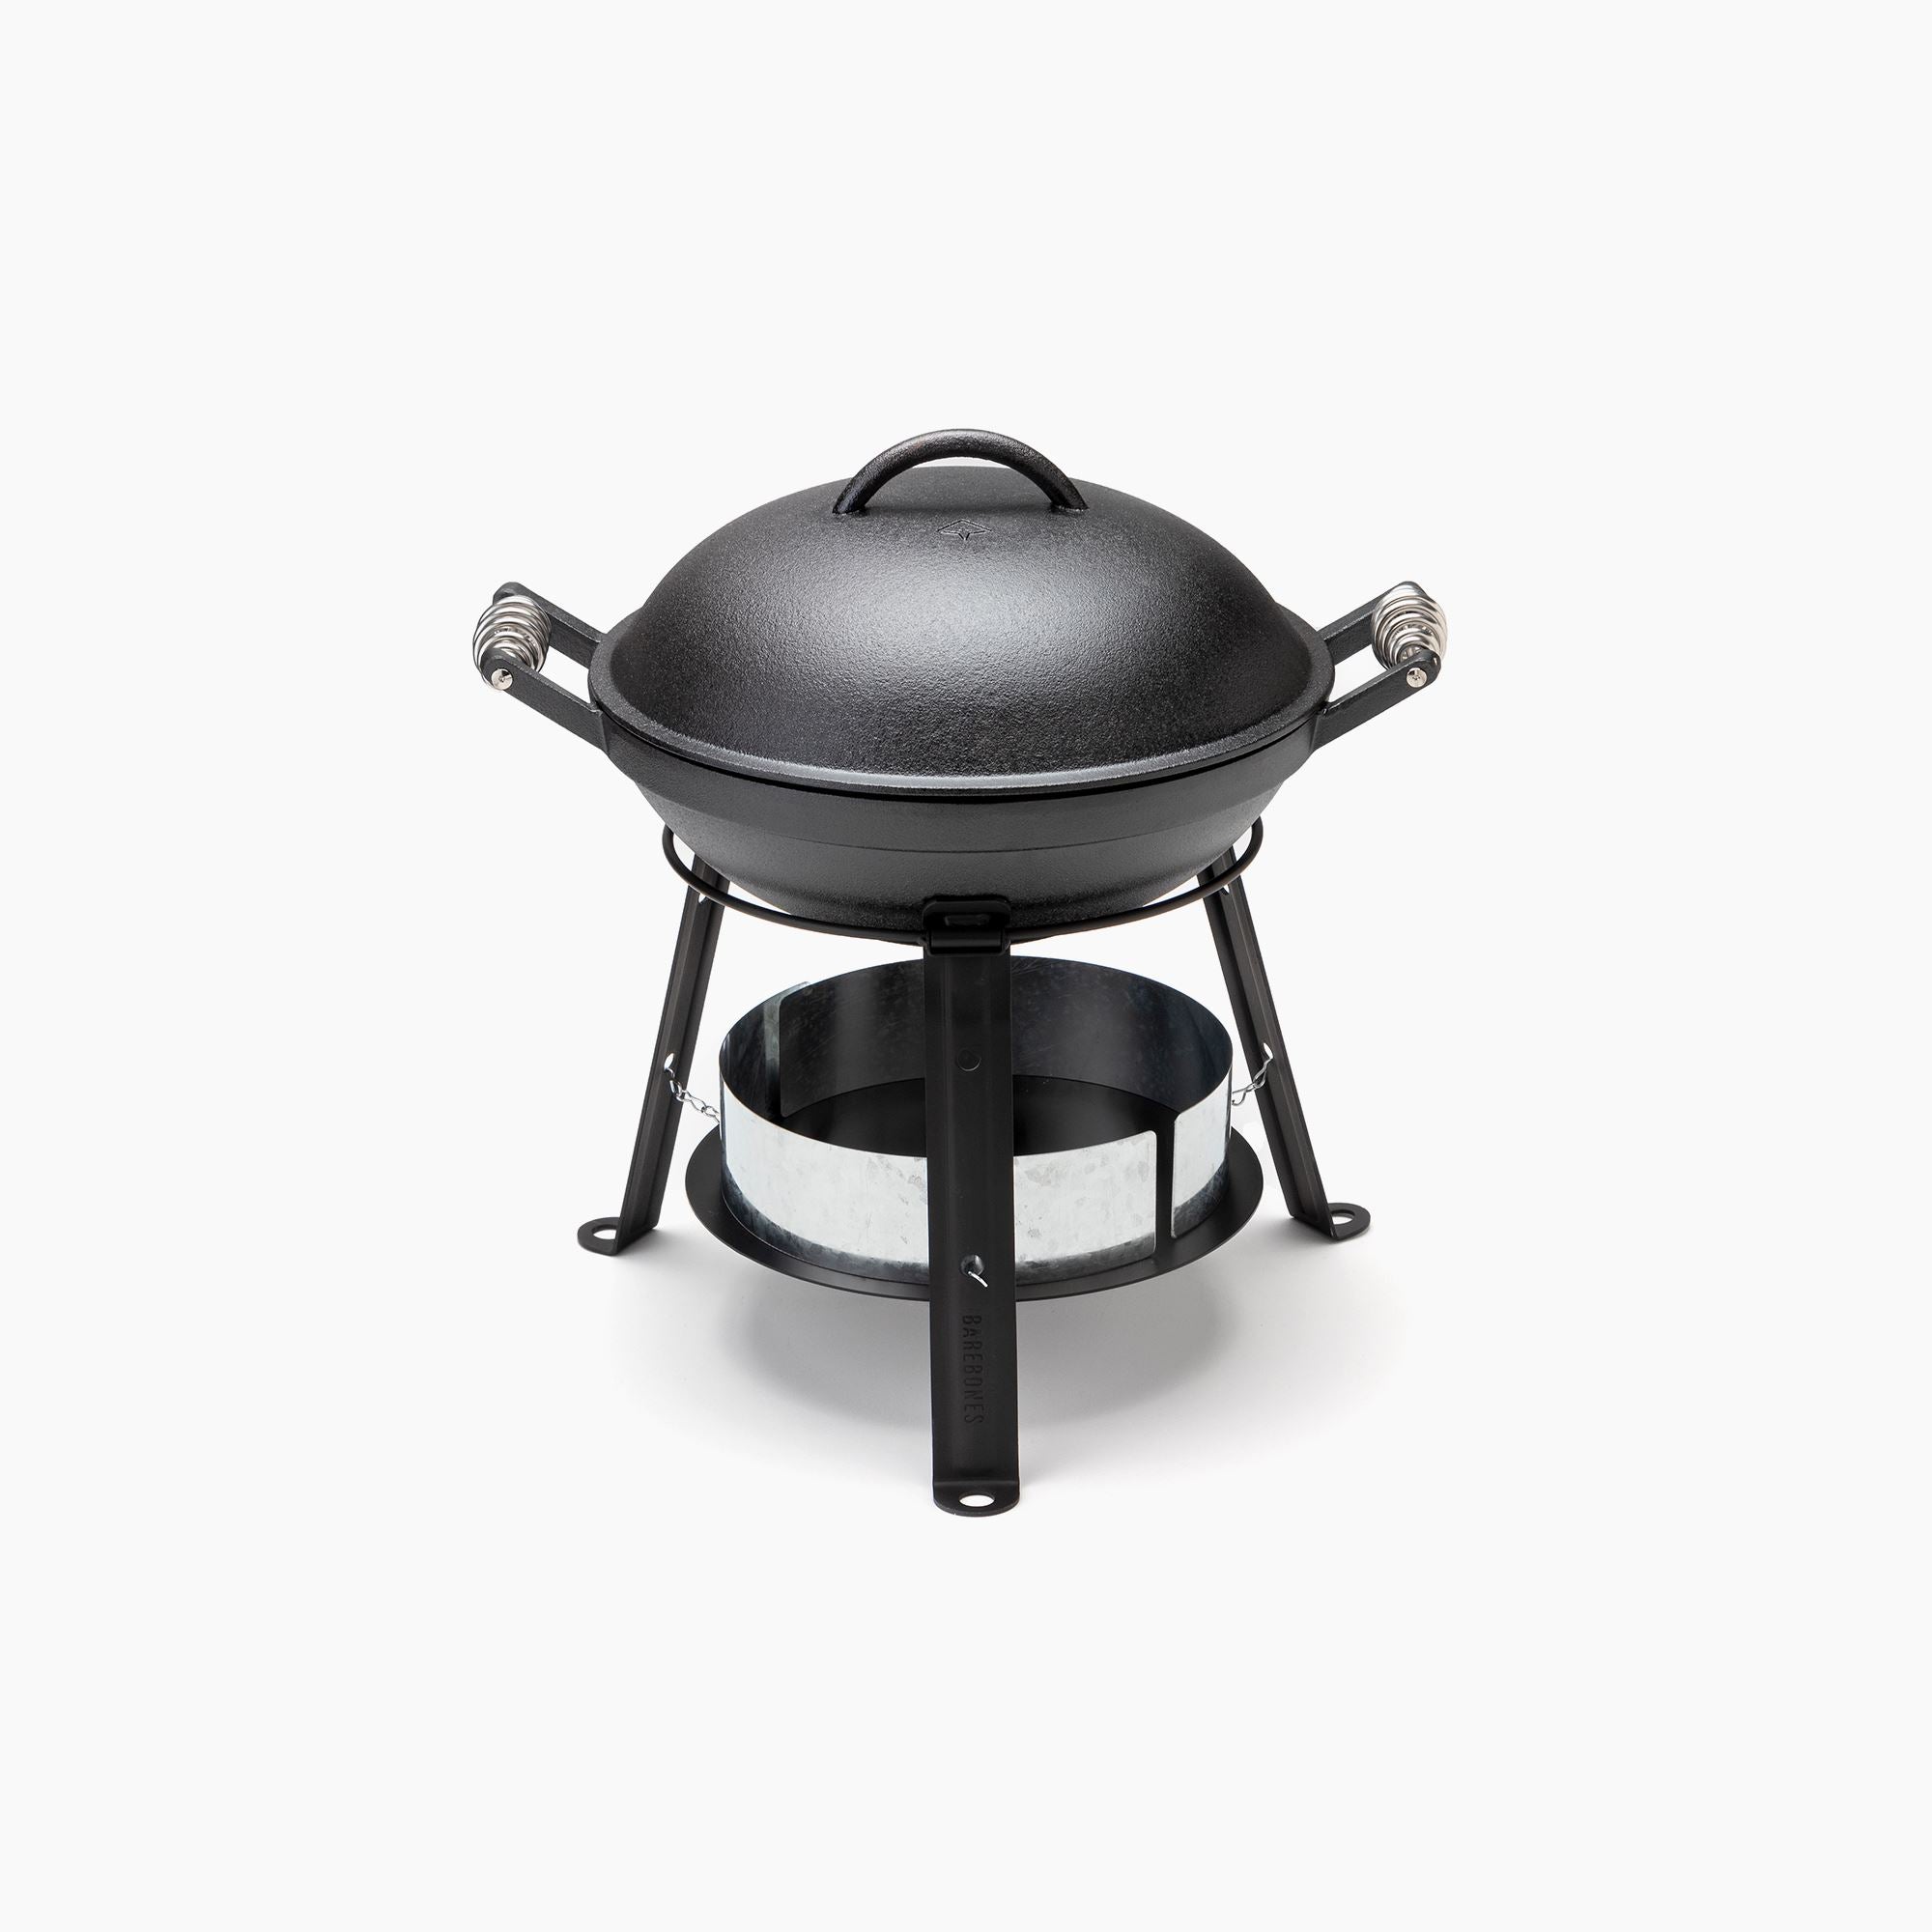 Barebones Living 6-Inch All-In-One Cast Iron Skillet - CKW-315 : BBQGuys